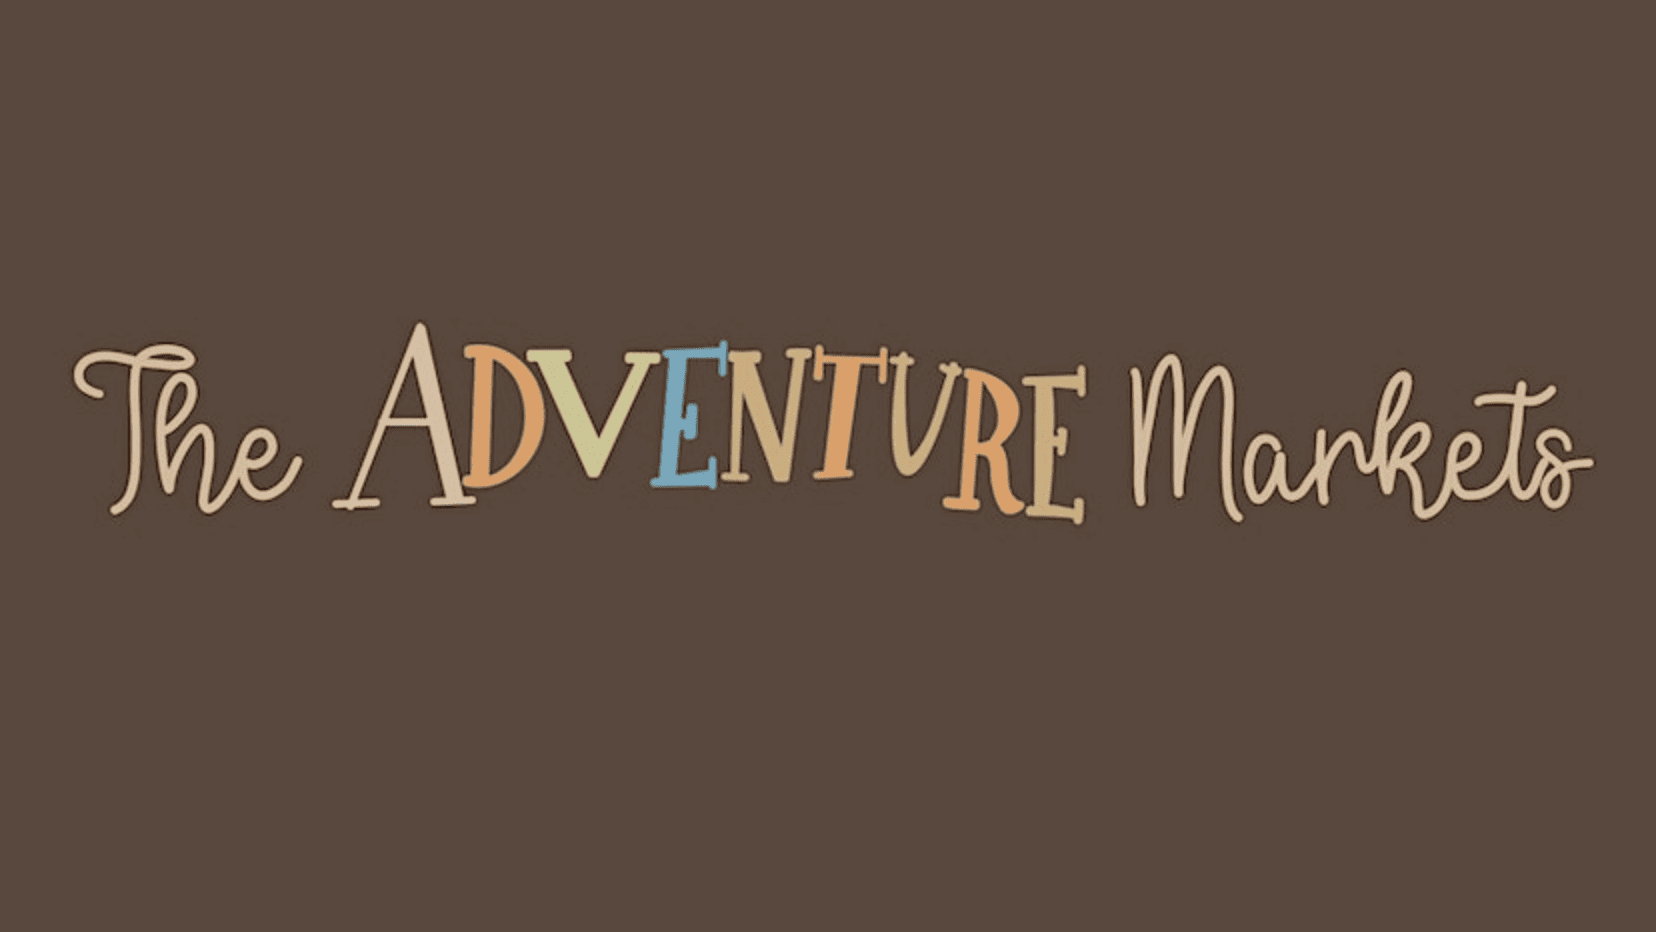 The adventure markets logo on a brown background.